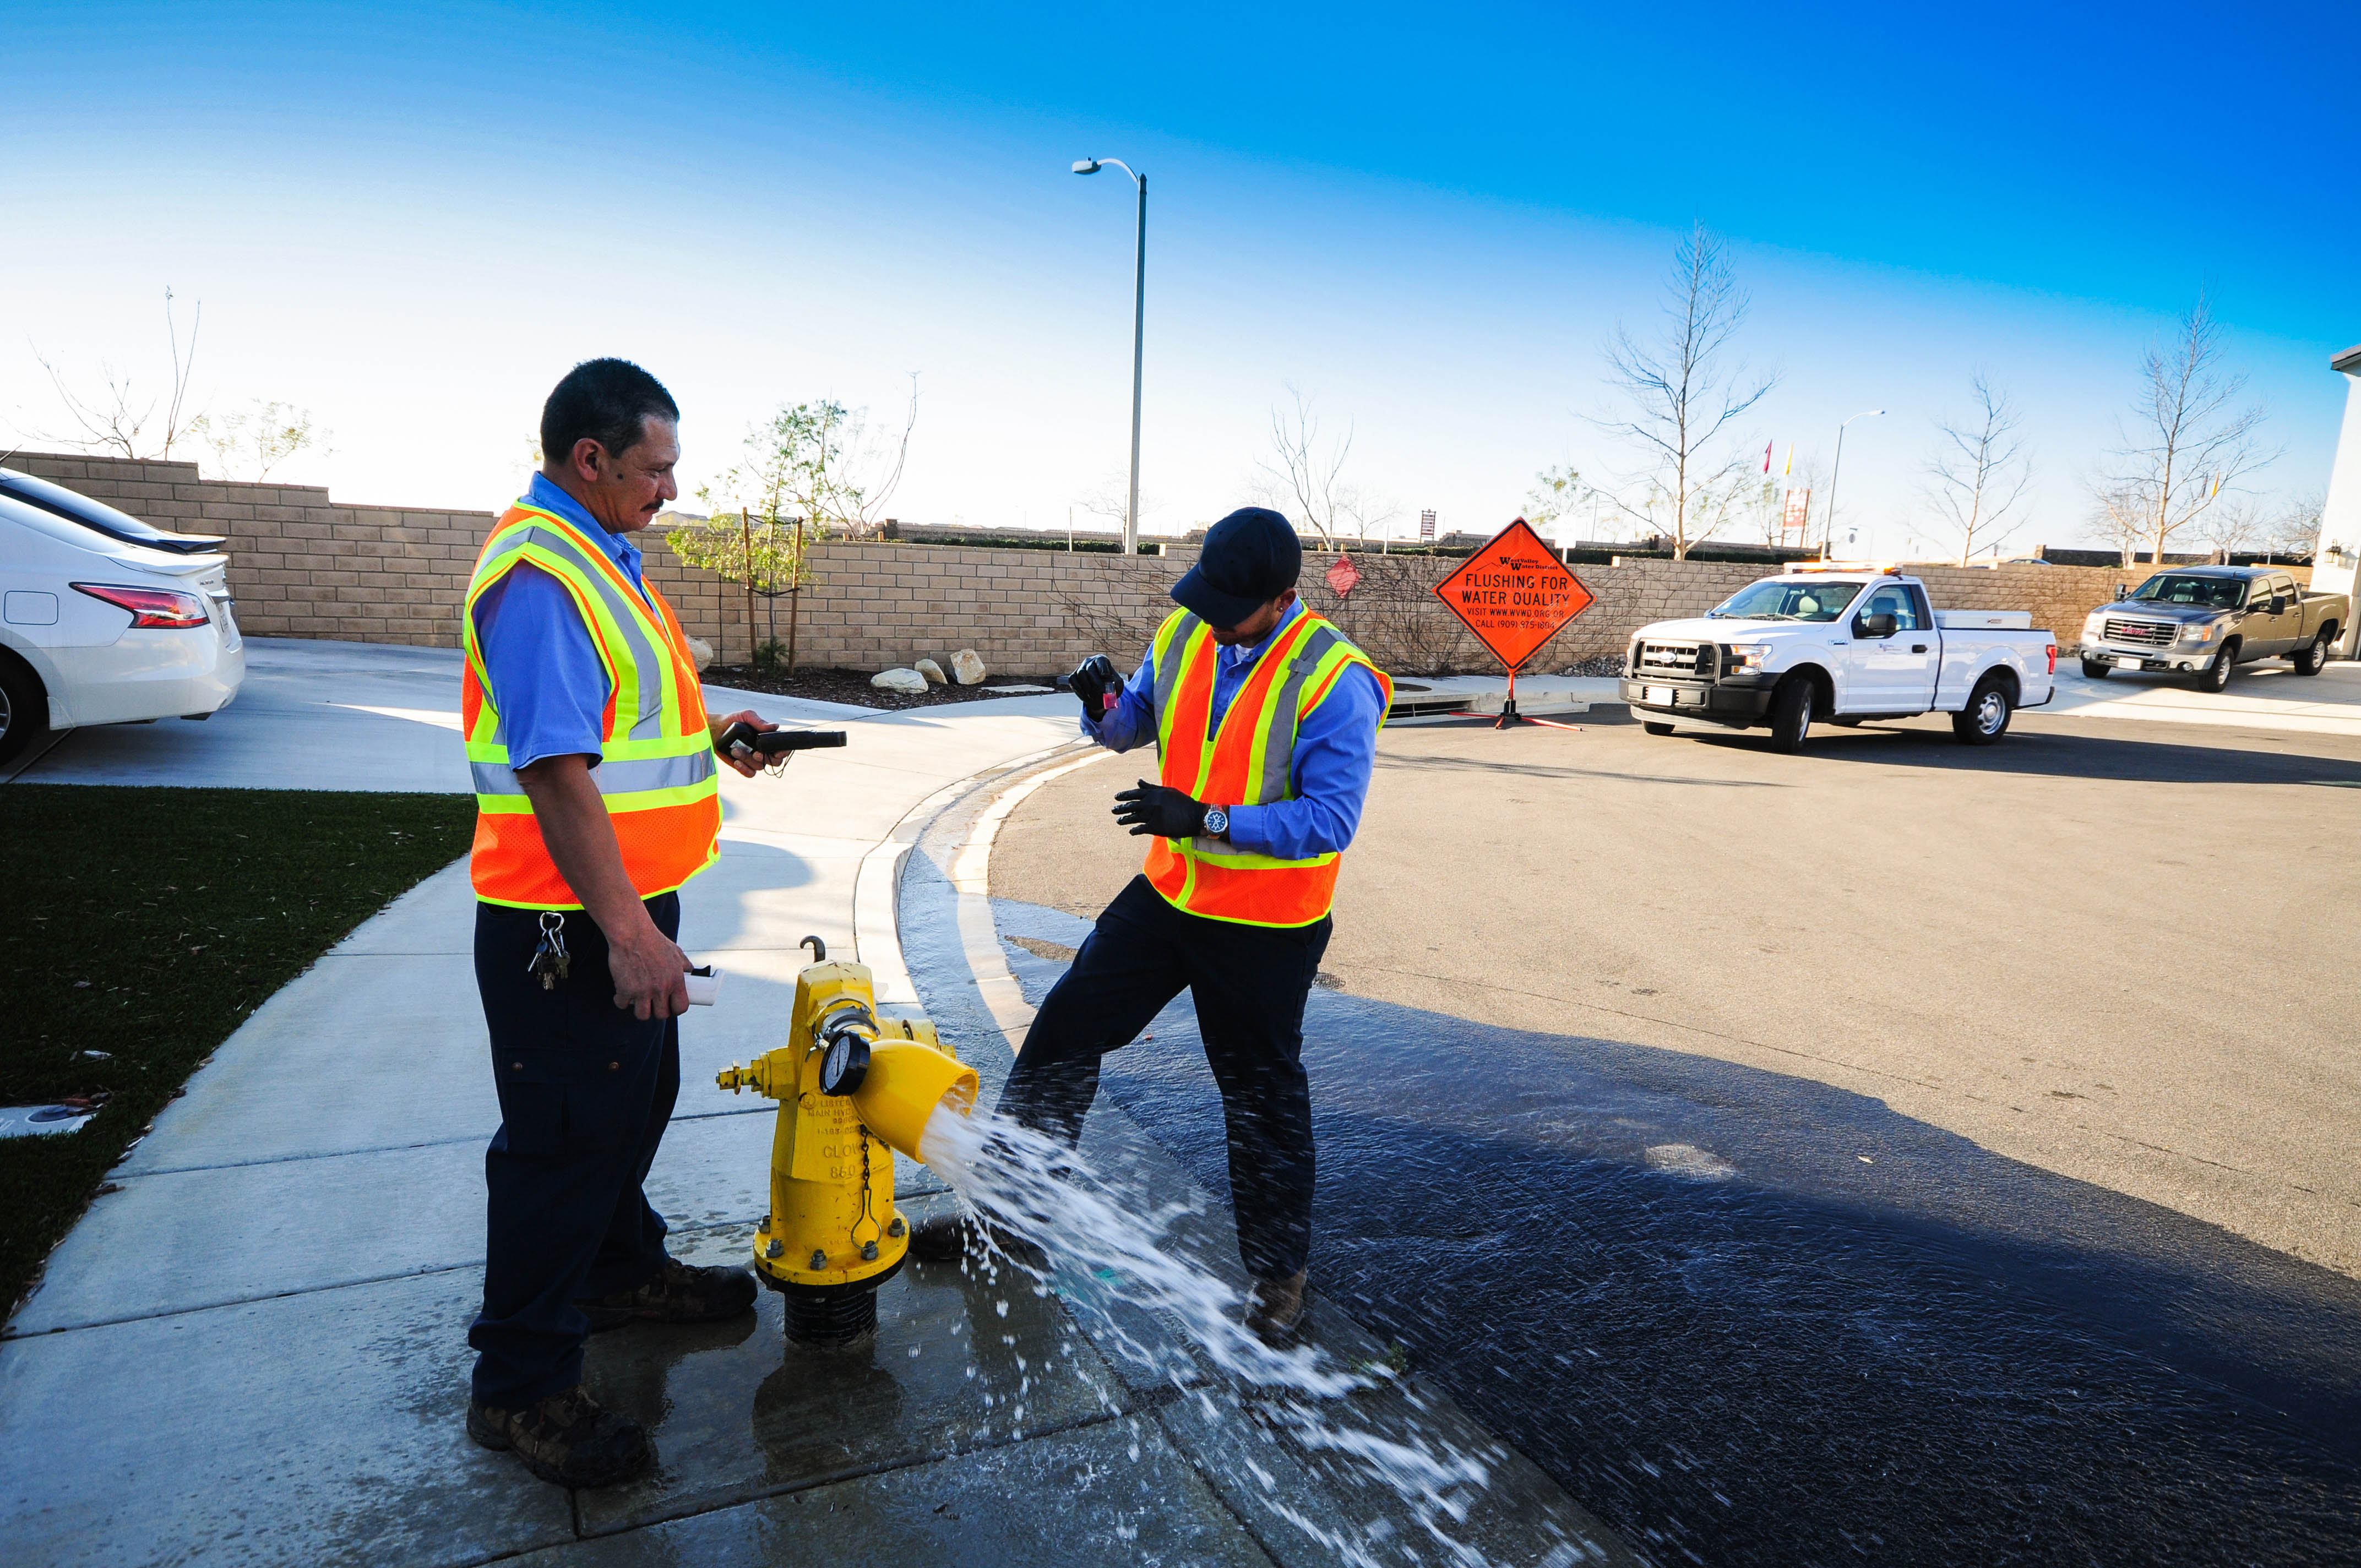 WVWD staff conducting flushing on a hydrant